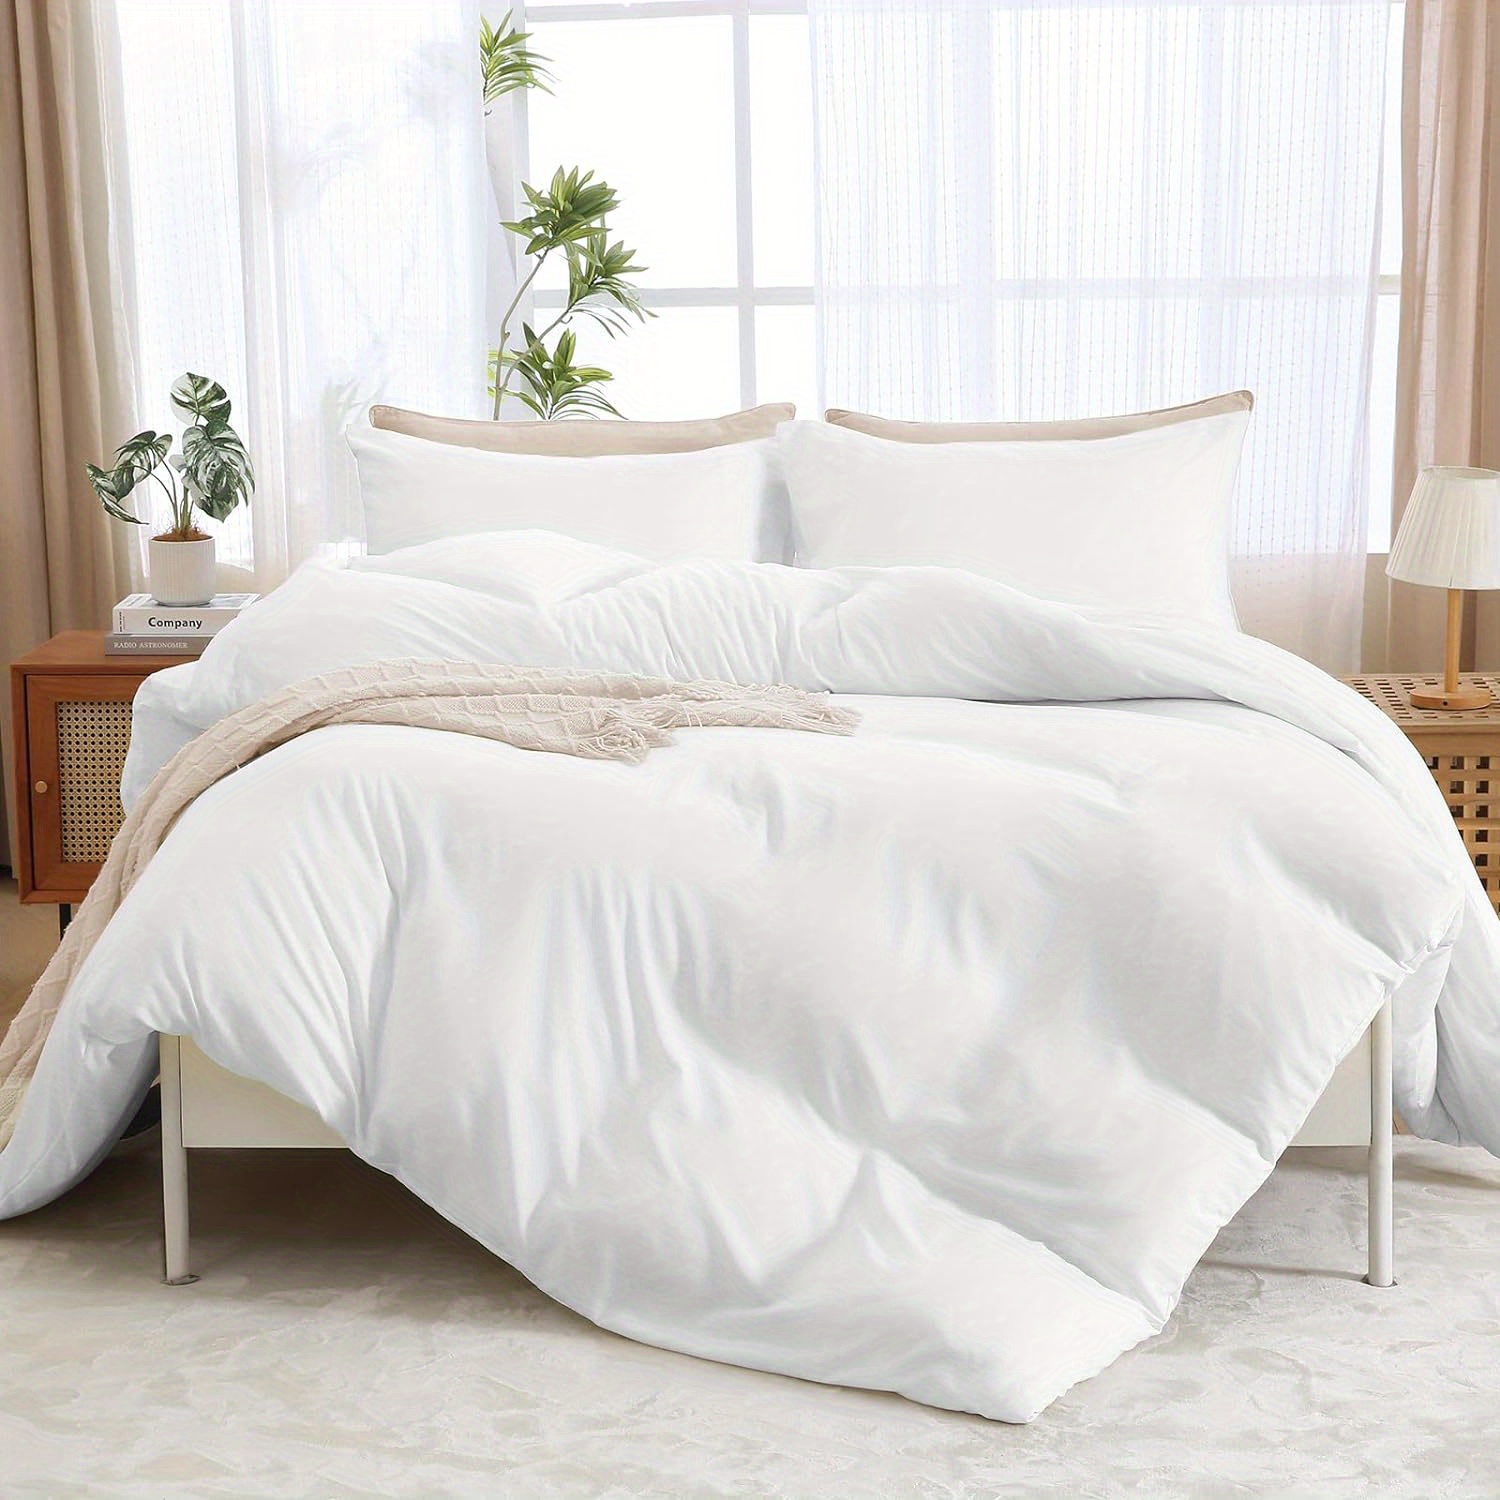 

White Duvet Cover Queen Size, Soft Double Brushed Duvet Covers Set 3 Pieces, Warm Comforter Cover With Zipper Closure And 2 Pillow Cases (90"×90")